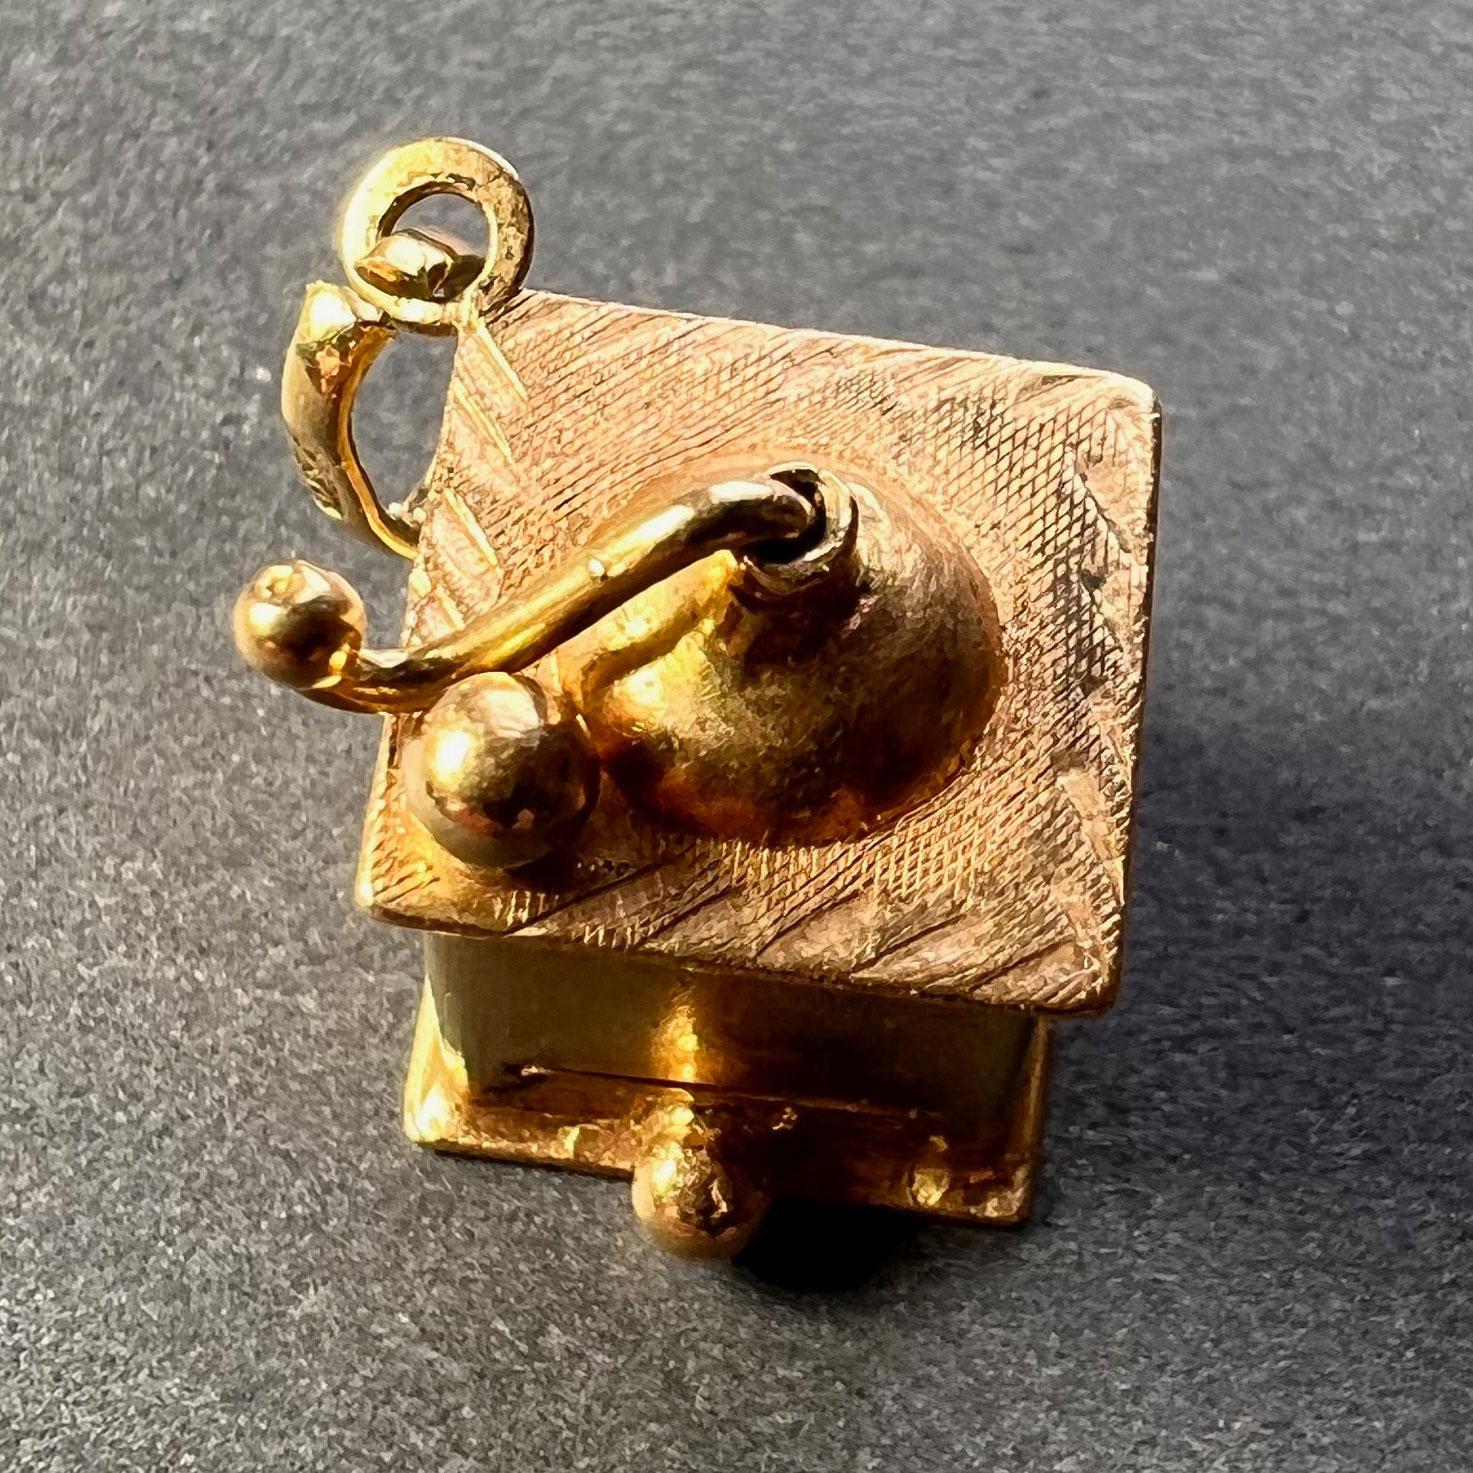 An 18 karat (18K) yellow gold charm pendant designed as a coffee grinder. Stamped 750 for 18 karat gold and 13AR for Italian manufacture to the bail.
 
Dimensions: 1.2 x 1.1 x 1 cm (not including jump ring)
Weight: 3.42 grams
